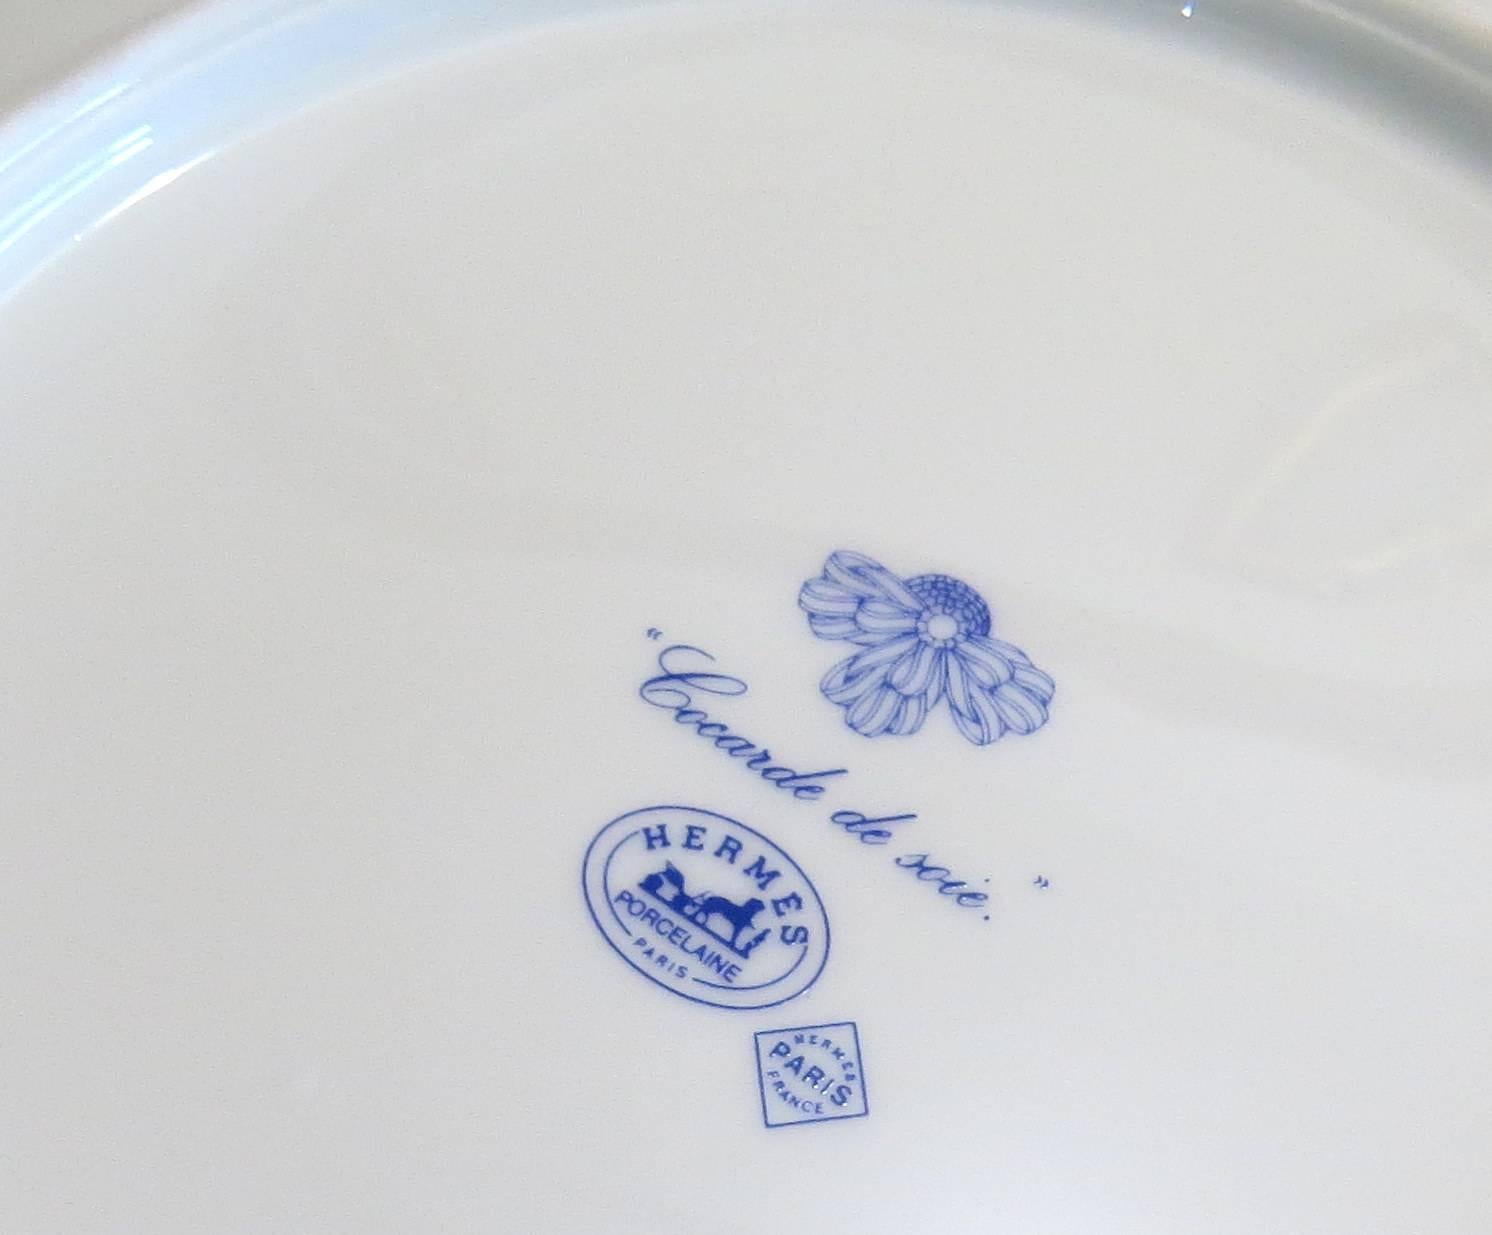 Set of 12 blue porcelain fruit dishes, crafted by Hermes for Coccard de Soir collection. Plates measure 8 5/8